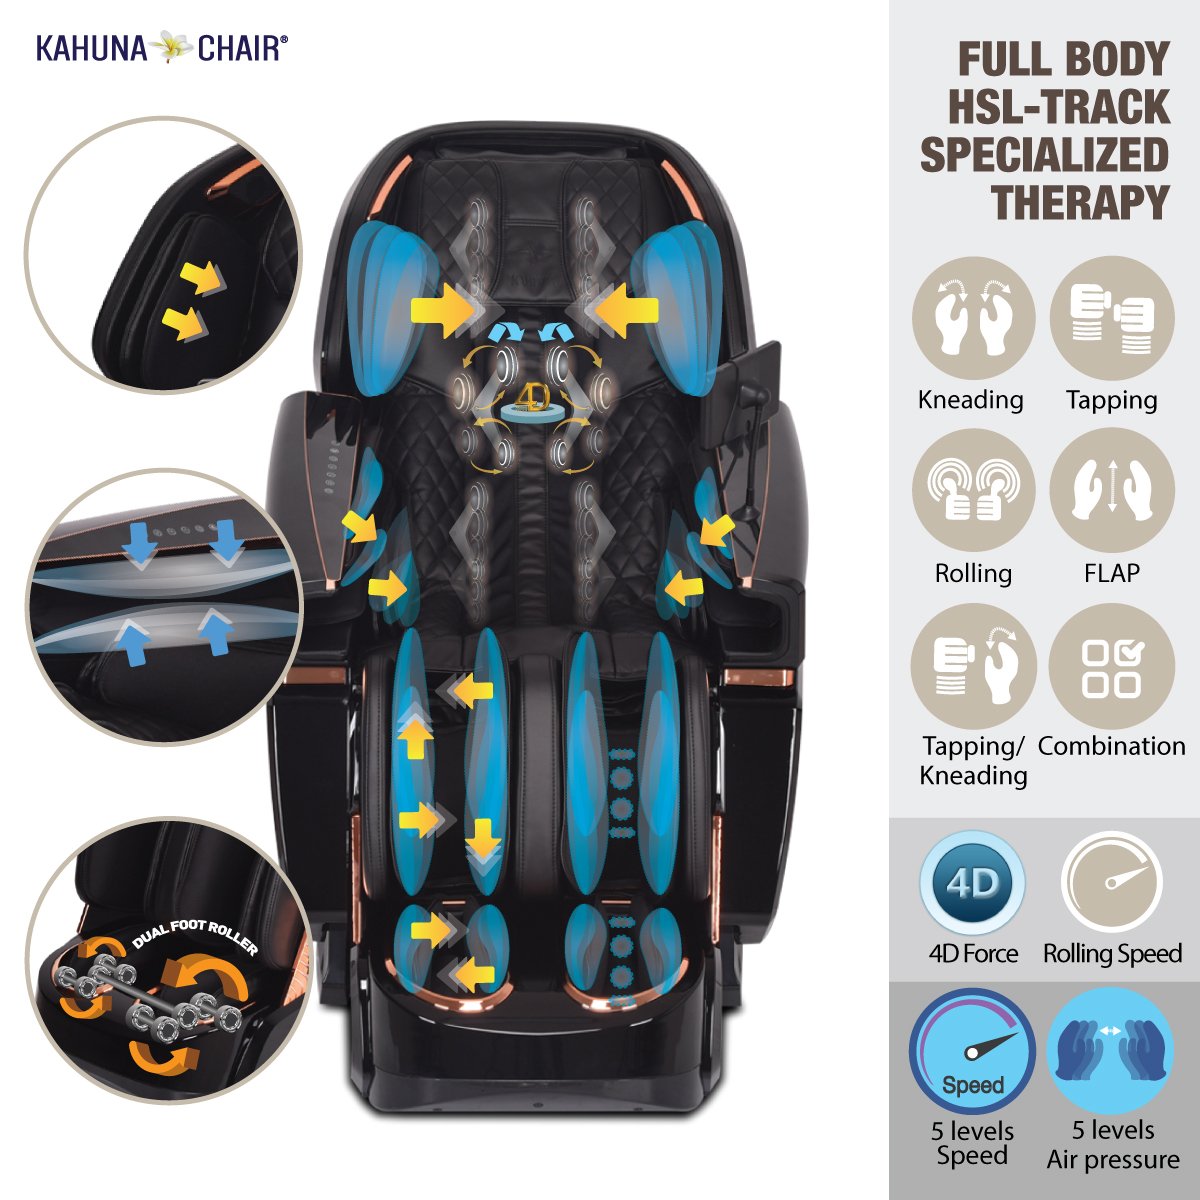 kahuna massage chair em8500 full body HSL Track Specialized therapy